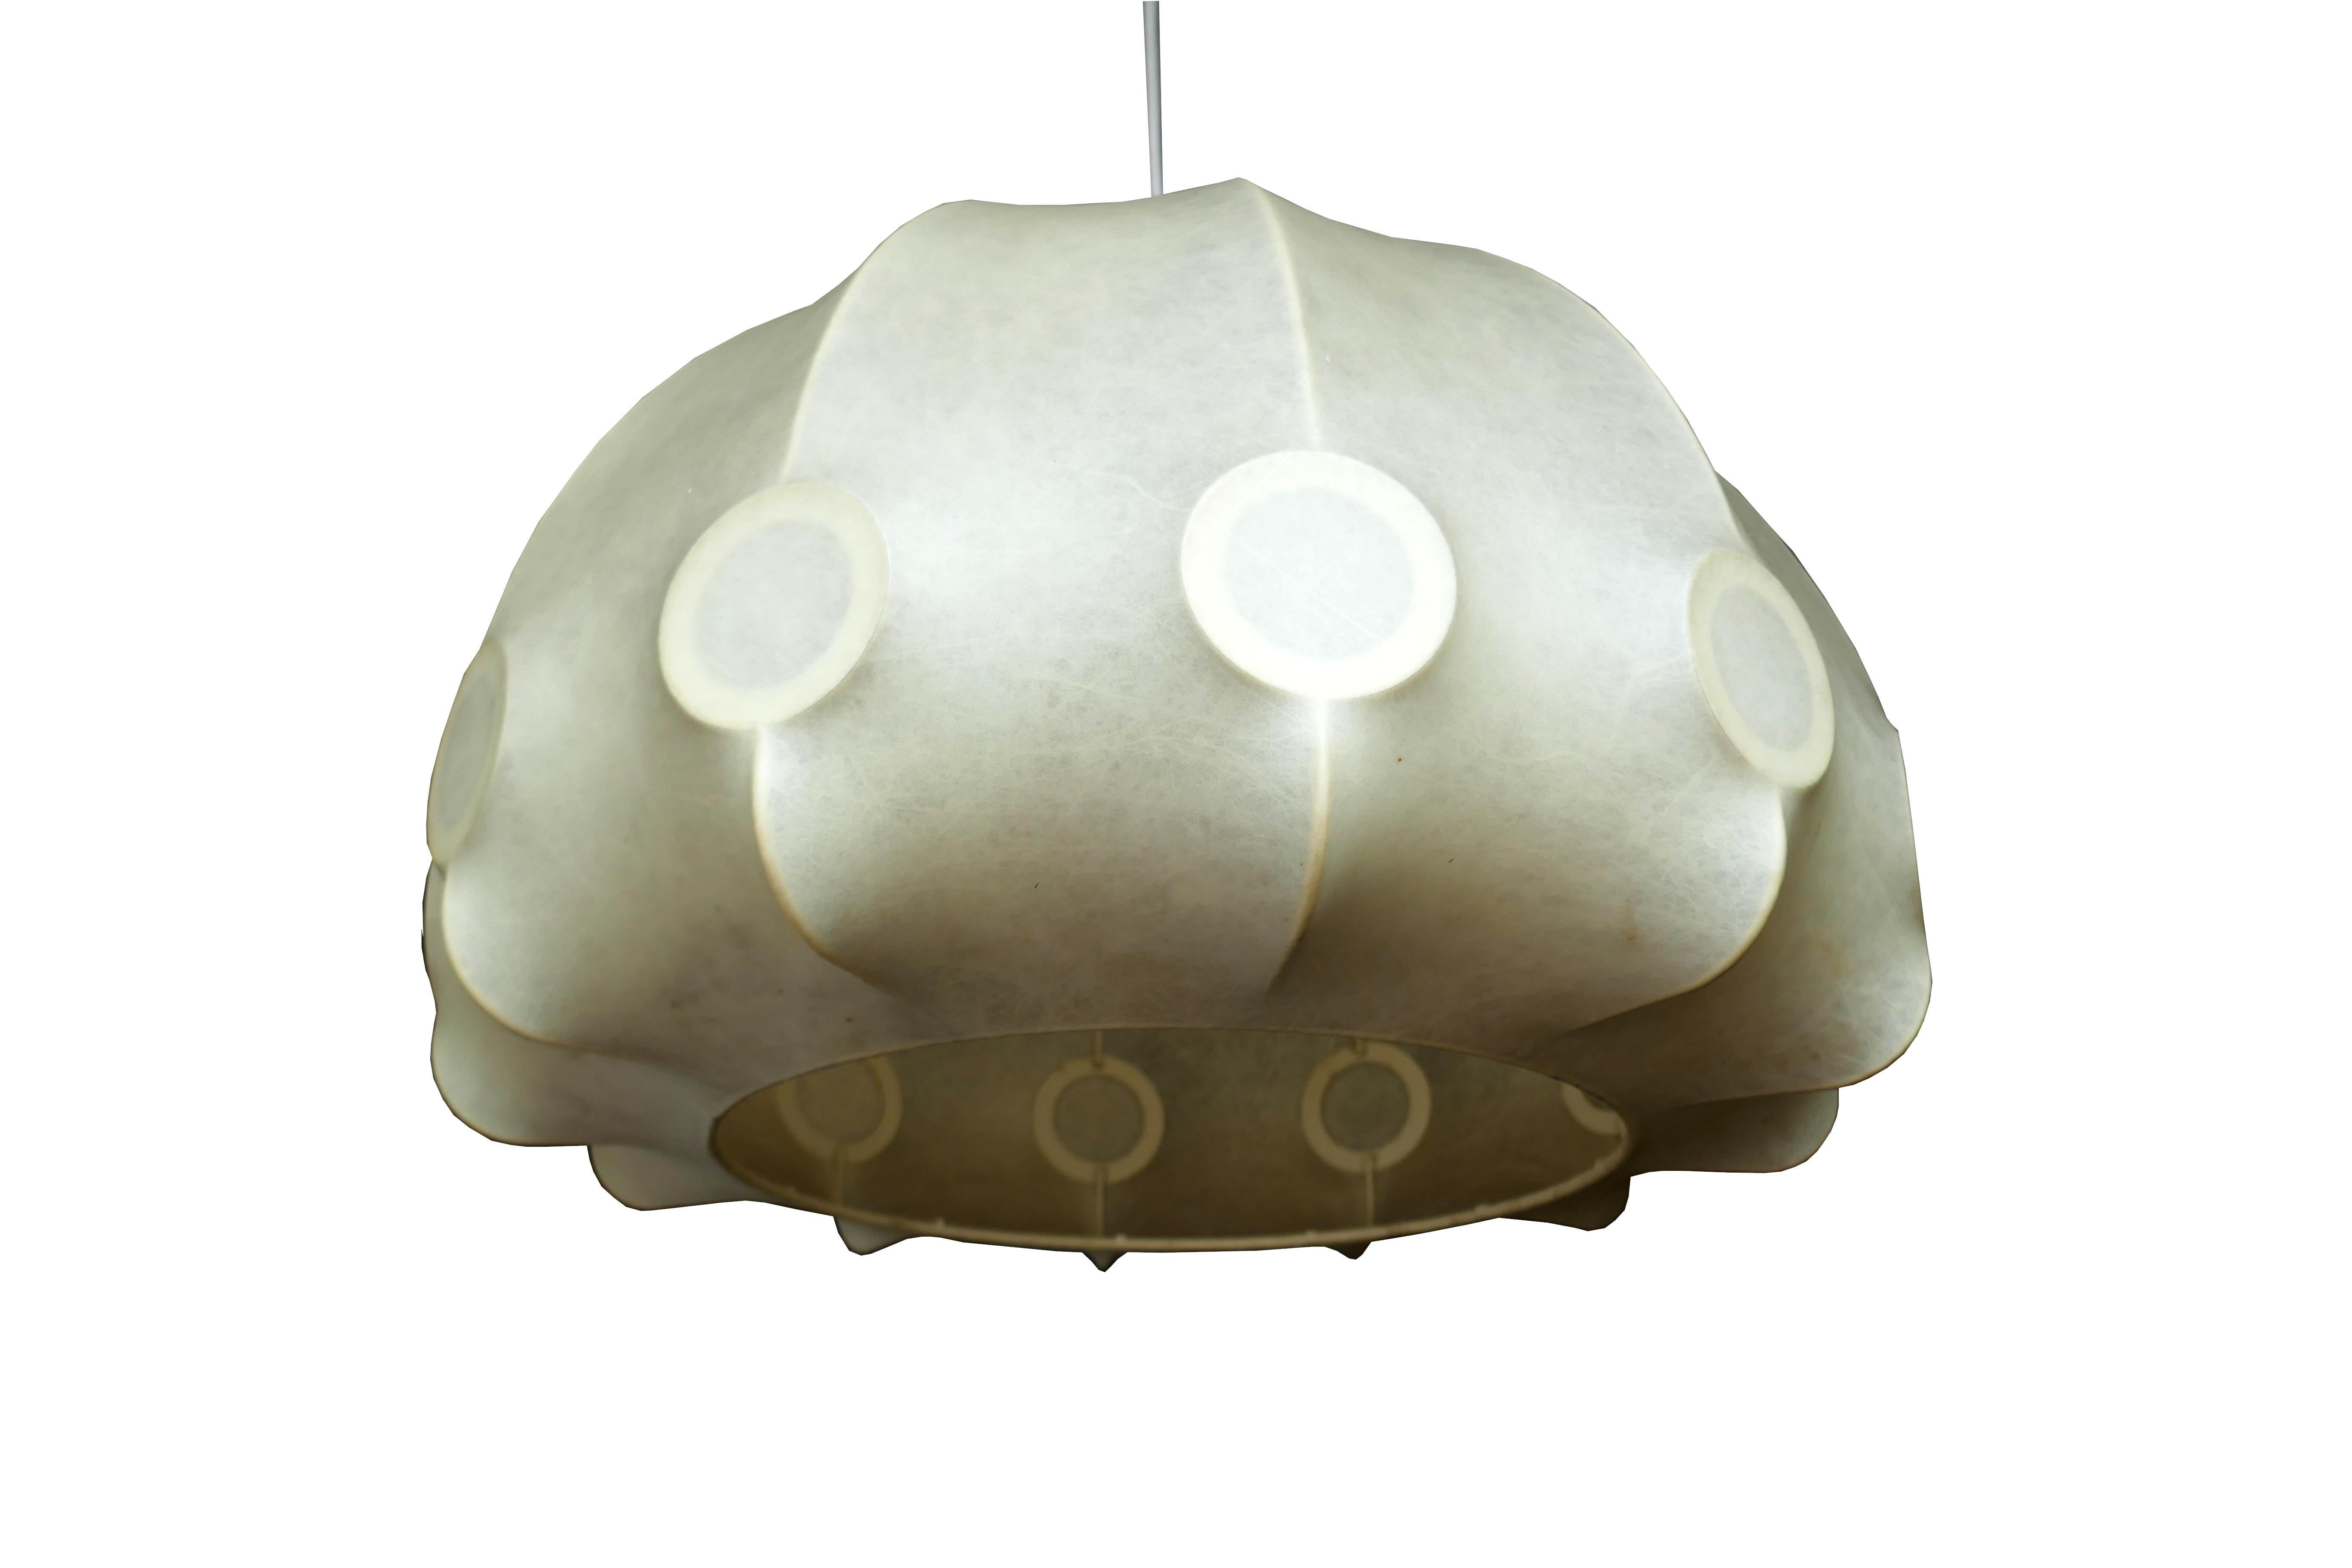 Lamp Friedel Wauer or Flos Castigloni Scarpa Cocoon In Good Condition For Sale In Lugo, IT